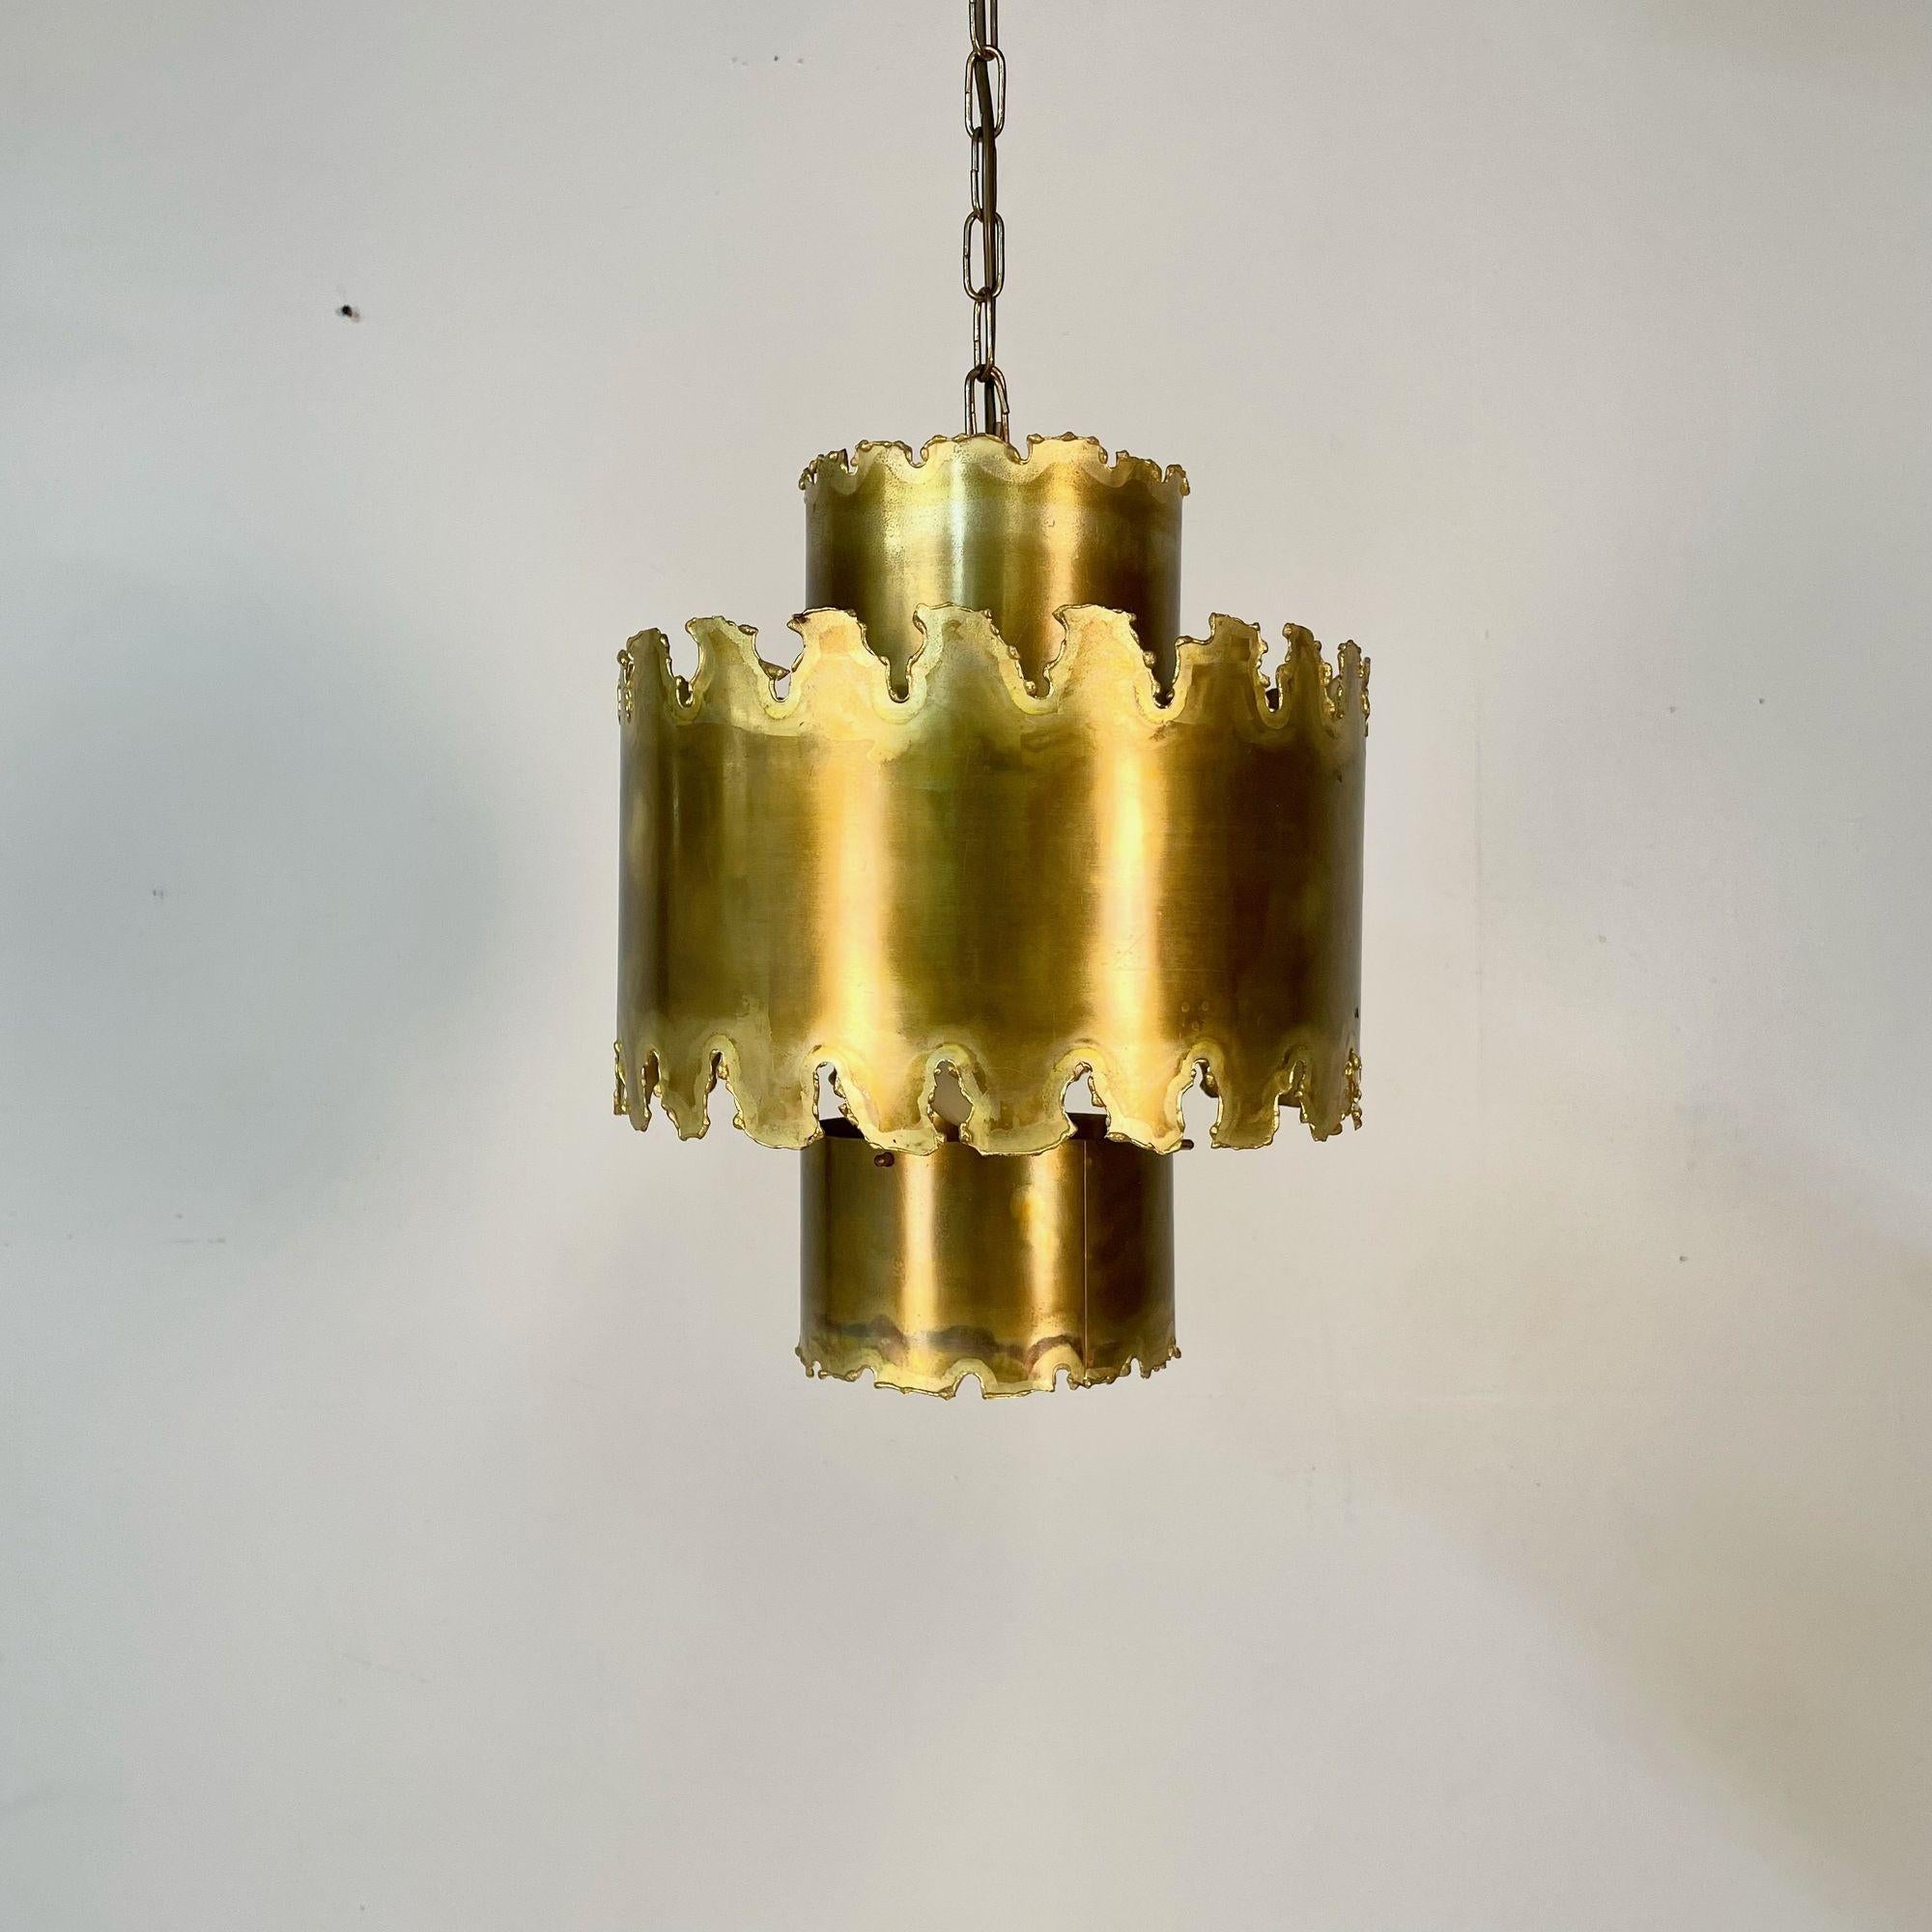 American Mid-Century Modern Brutalist Chandelier / Pendant by Tom Greene, Patinated Brass For Sale